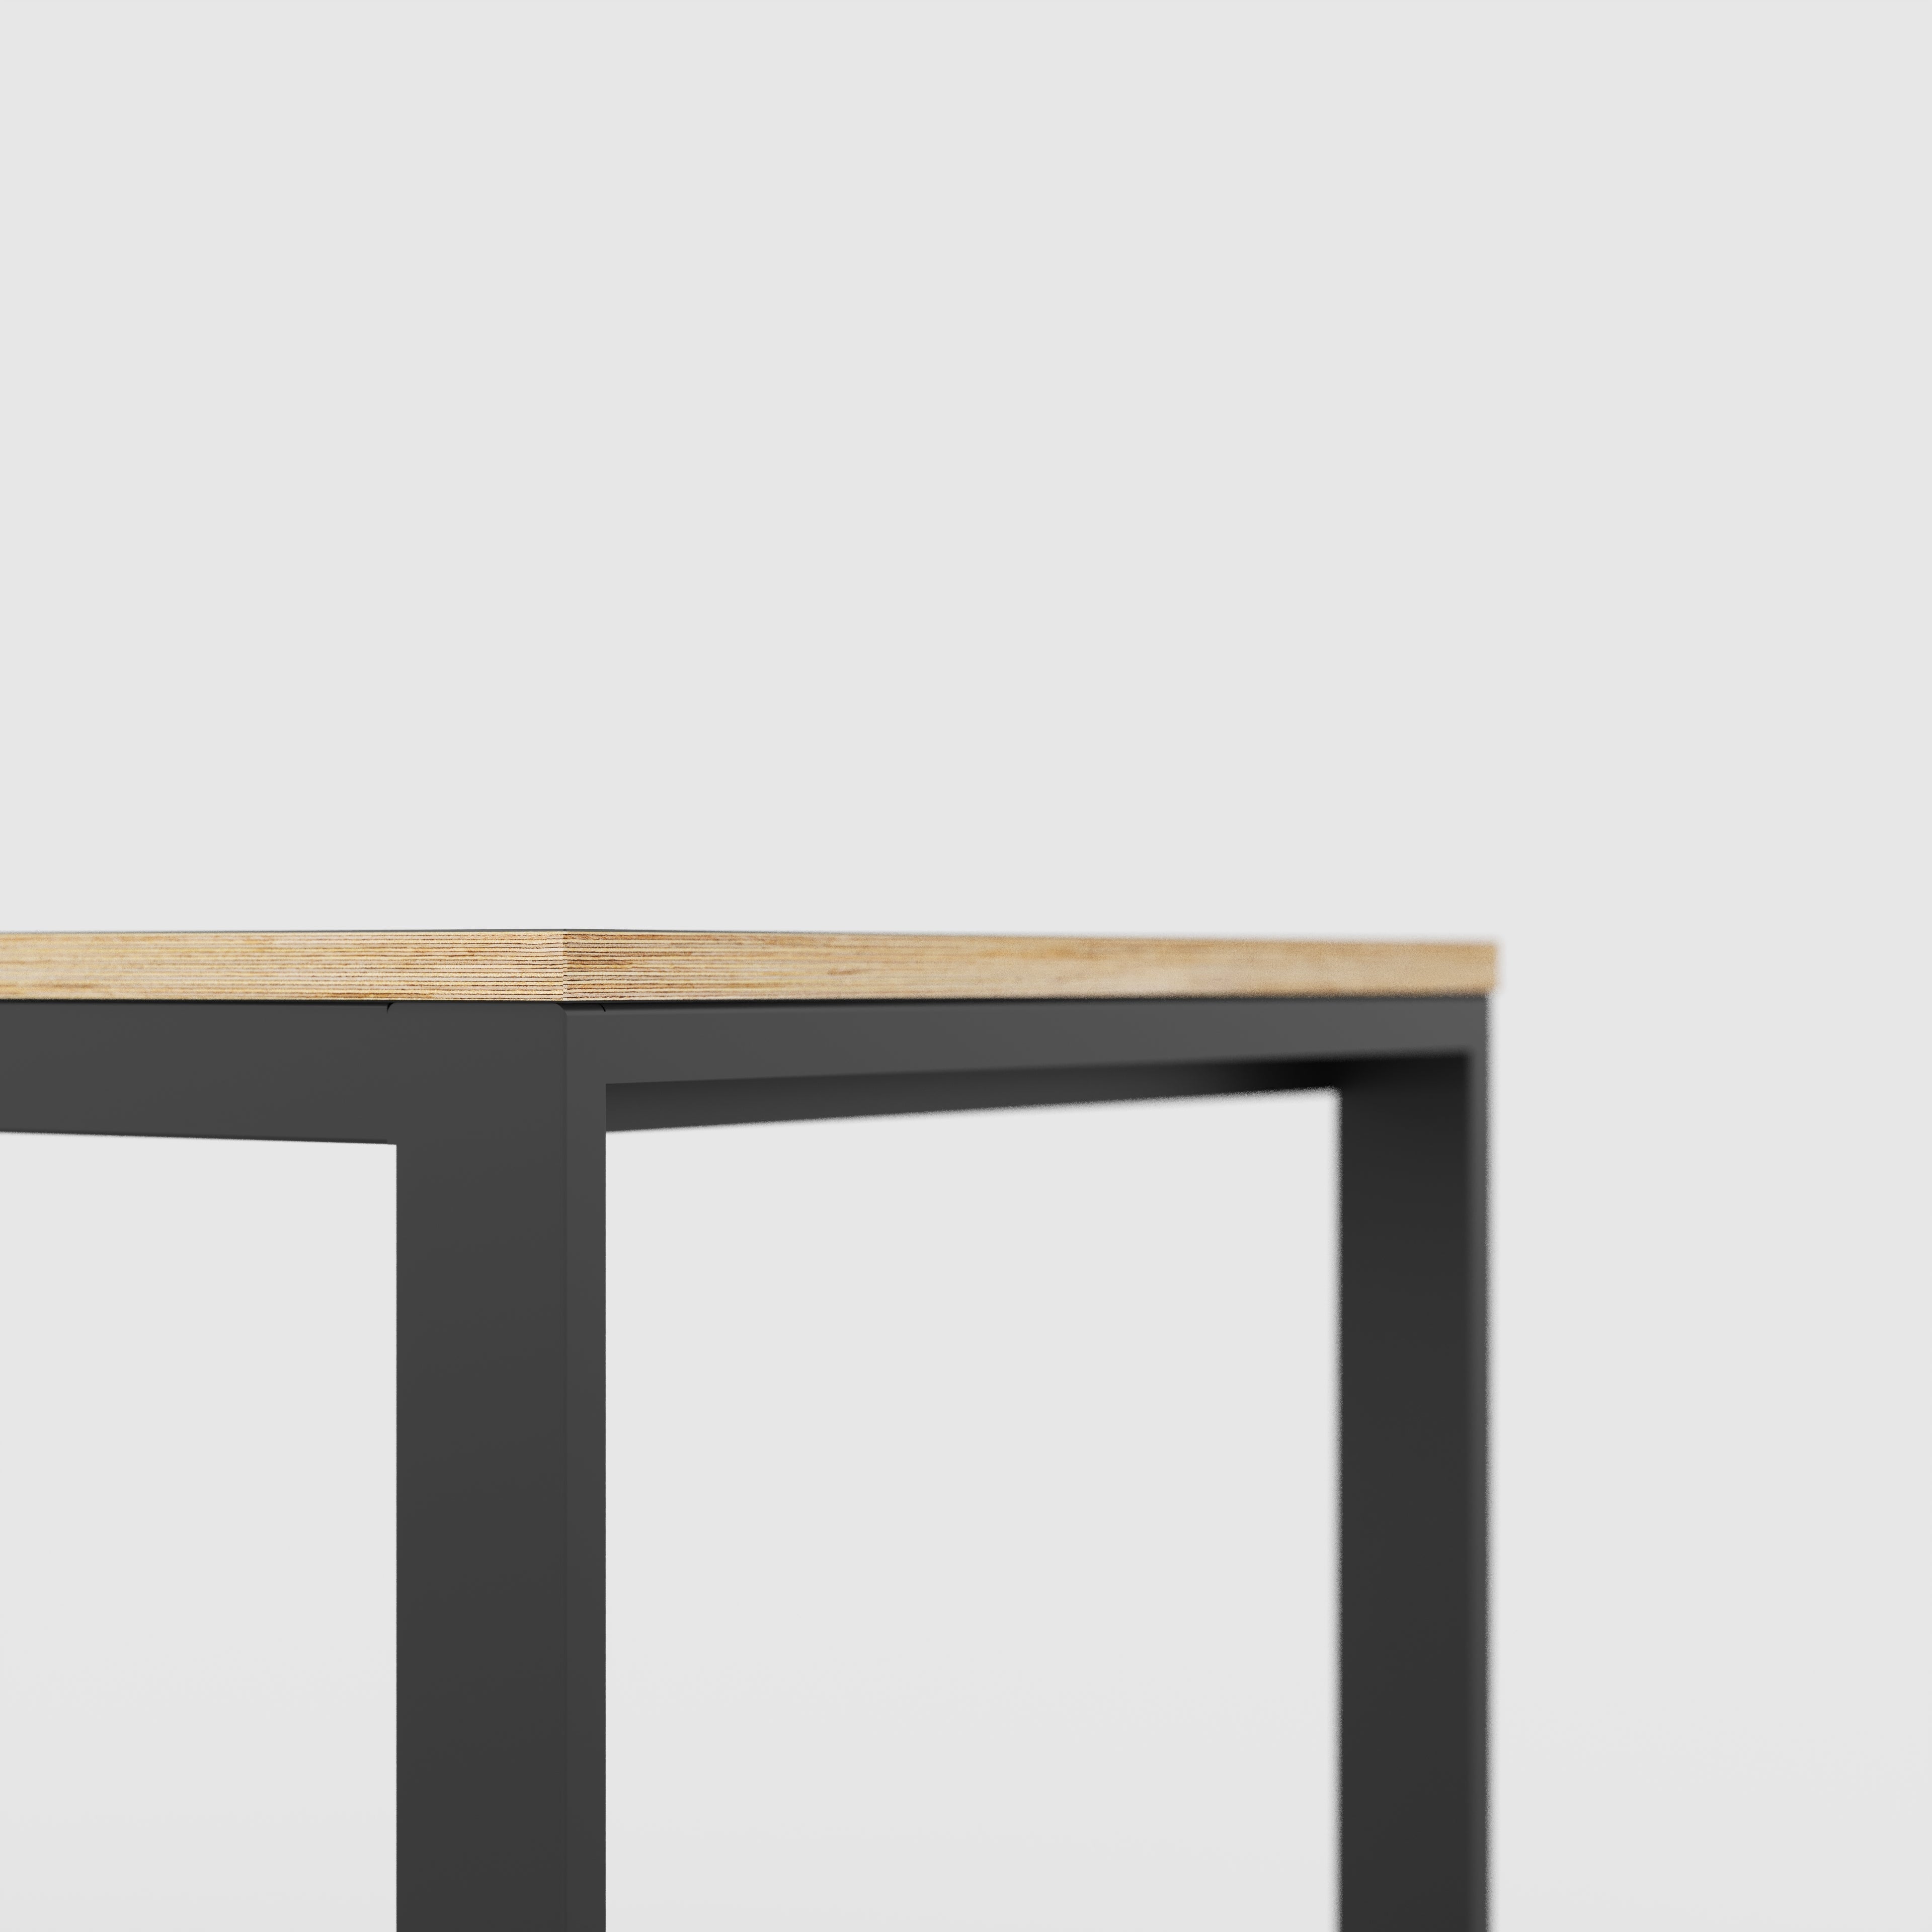 Table with Black Industrial Frame - Plywood Oak - 1800(w) x 745(d) x 735(h)